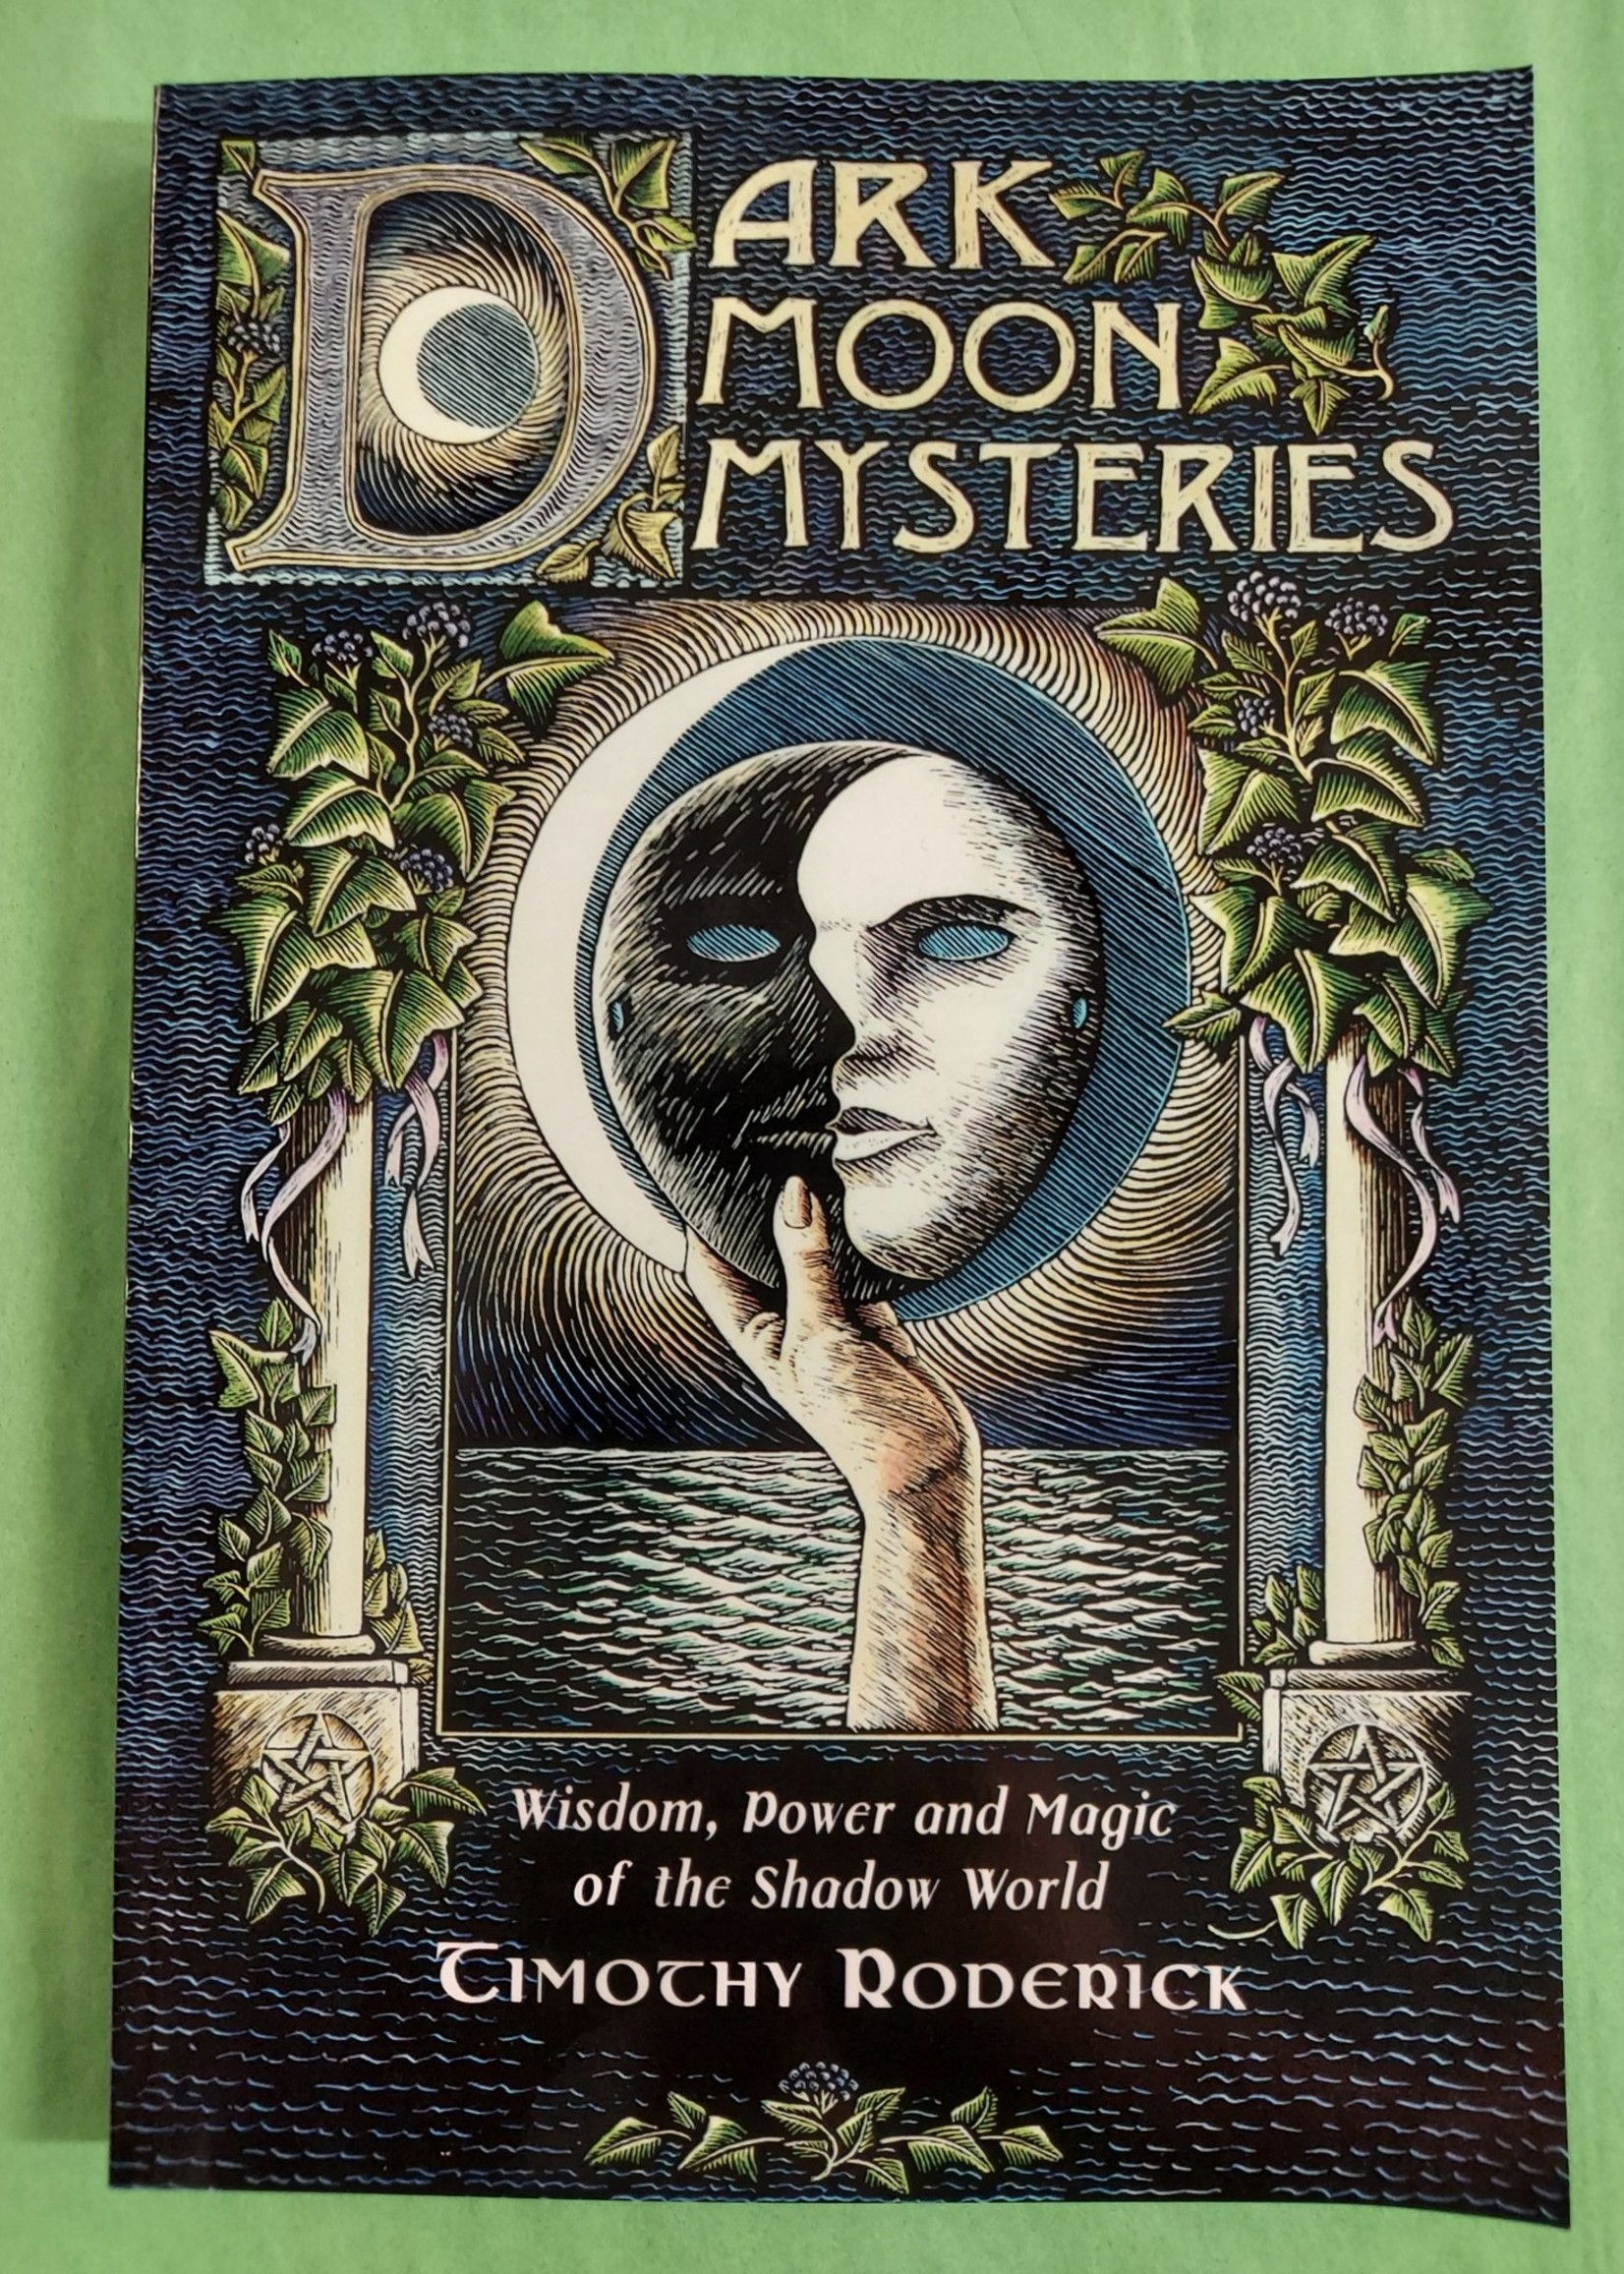 Dark Moon Mysteries - BY TIMOTHY RODERICK